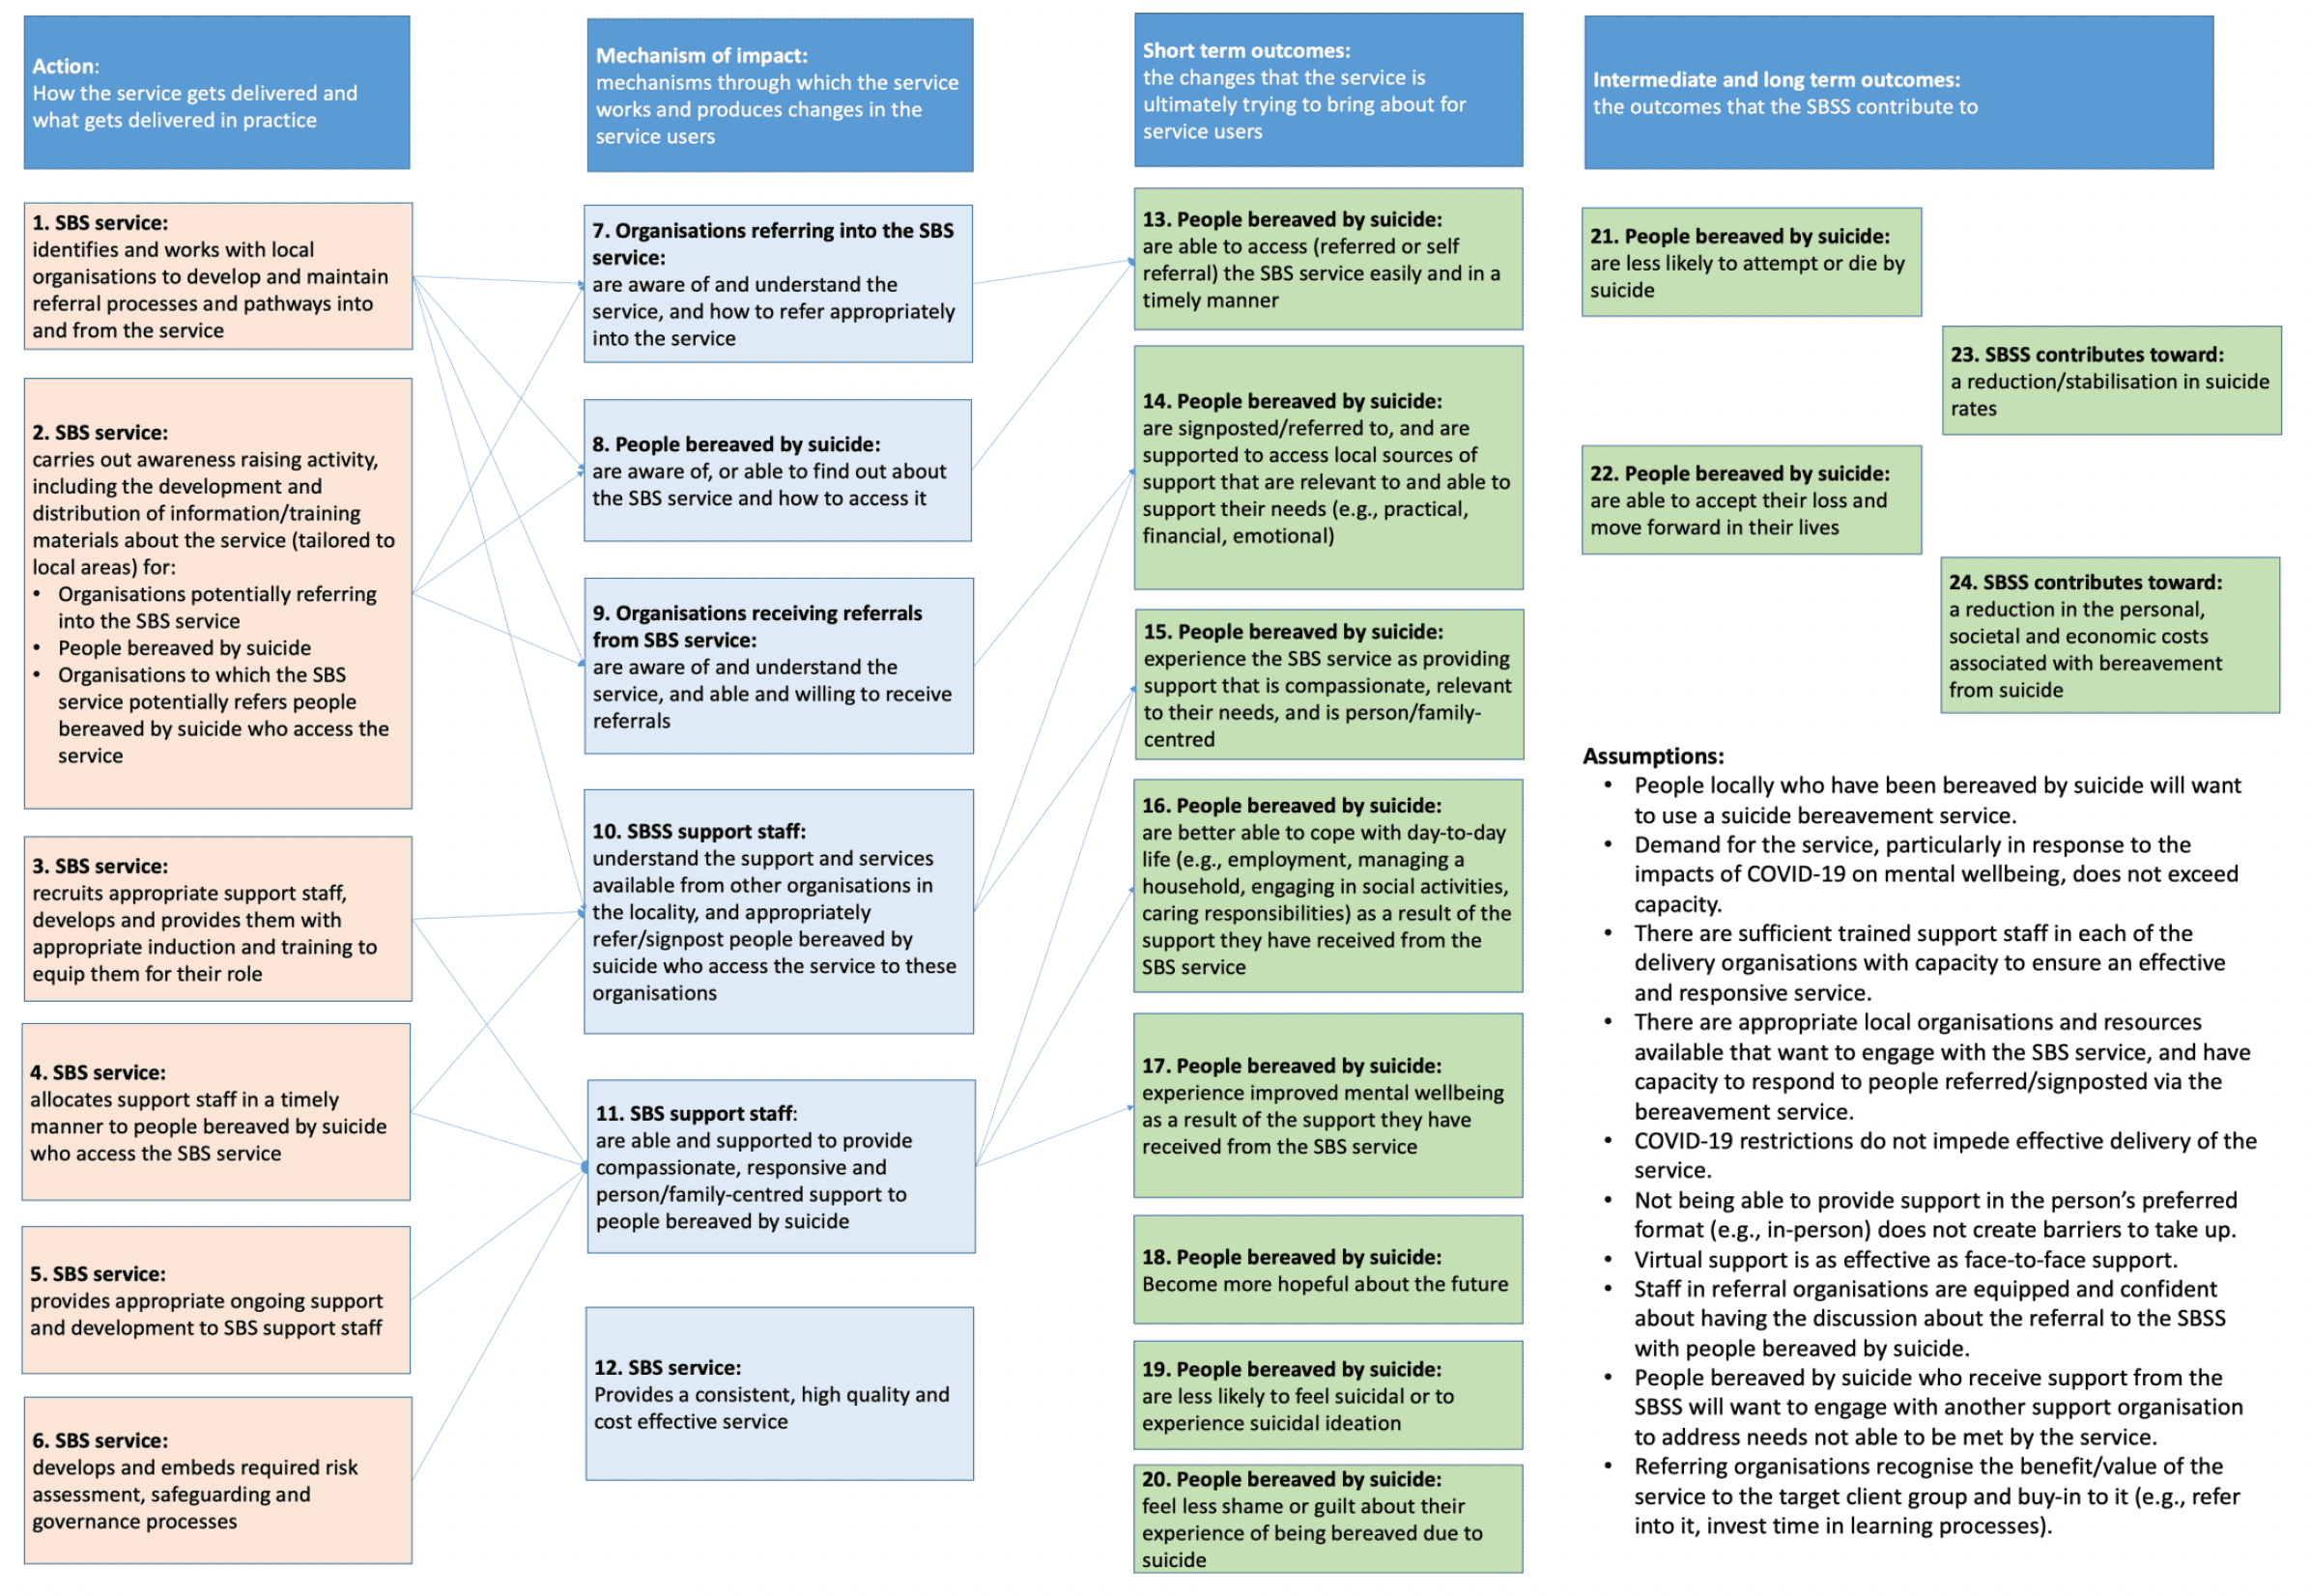 Logic model for the suicide bereavement support service, setting out the actions taken and the mechanisms of impact that will generate intended short, intermediate and long term outcomes.